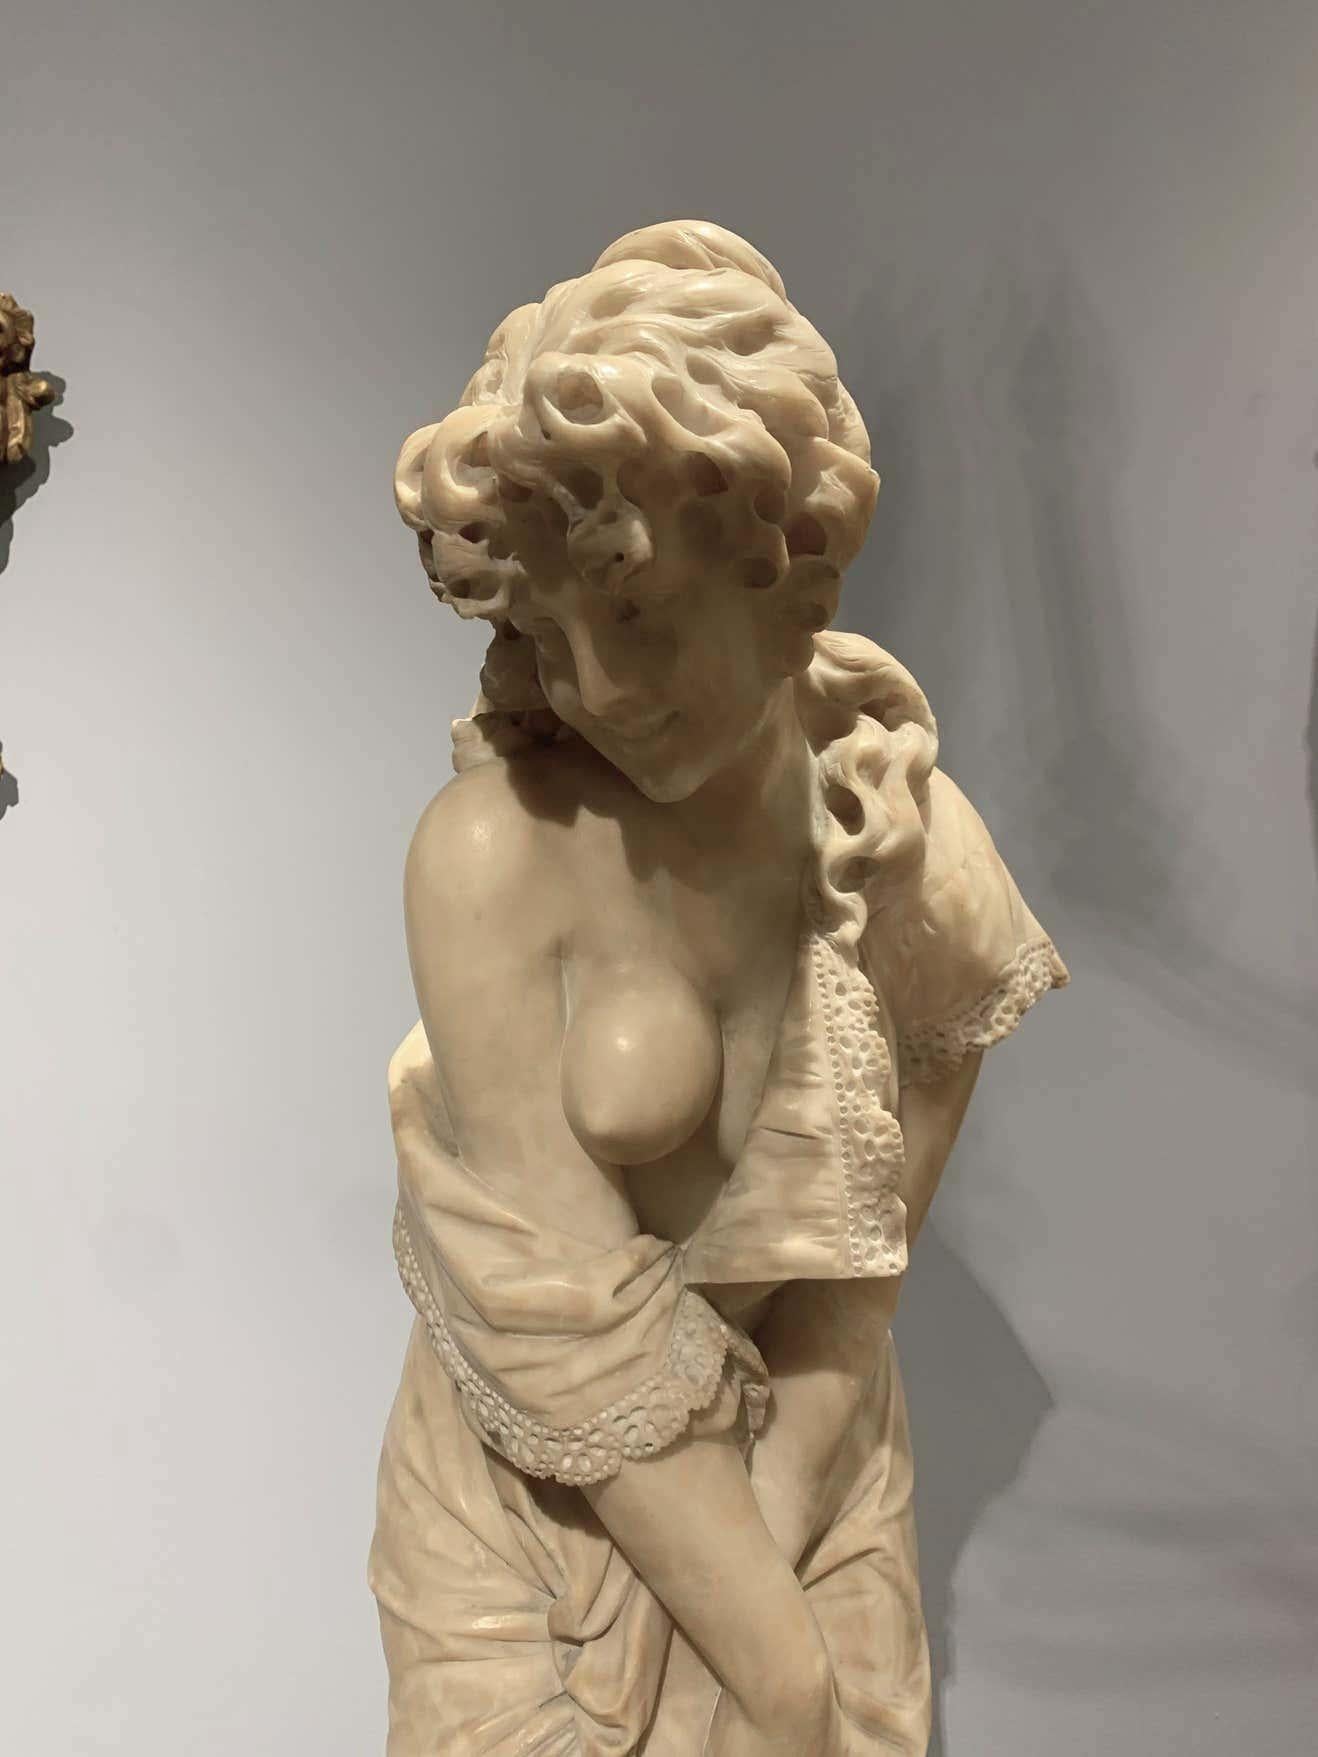 La Sorpresa 
by Cesare Lapini (Italian, (1848 - 1910)
Alabaster
H 35 in. (88.9 cm)

Cesare Lapini  was a sculptor of allegorical and genre subjects modeled after Antiquity. He contributed six sculptures to the Esposione Generale Italiana di Torino